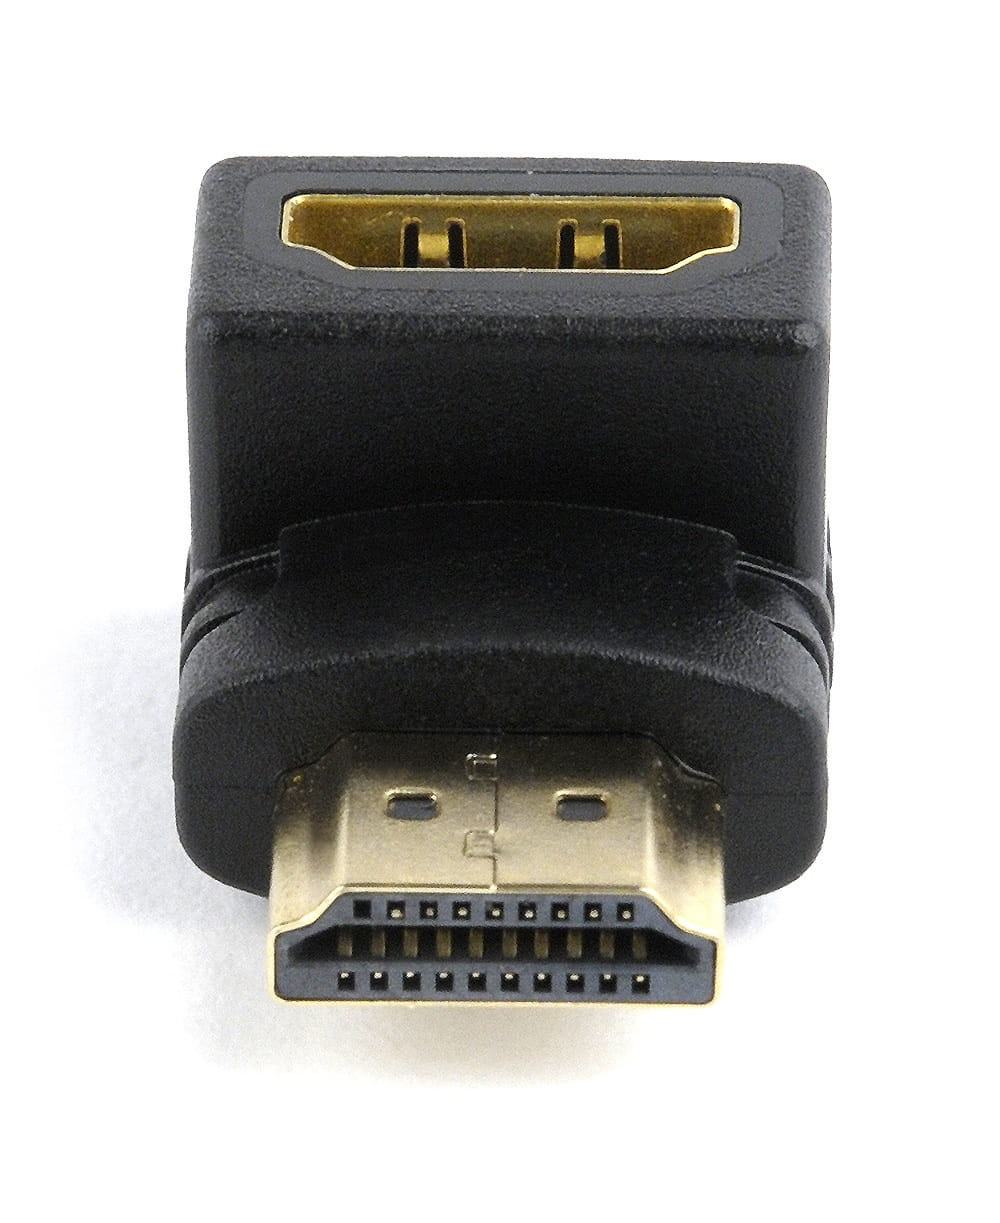 Adapter Cablexpert A-HDMI90-FML / HDMI M to HDMI F / 90 degrees